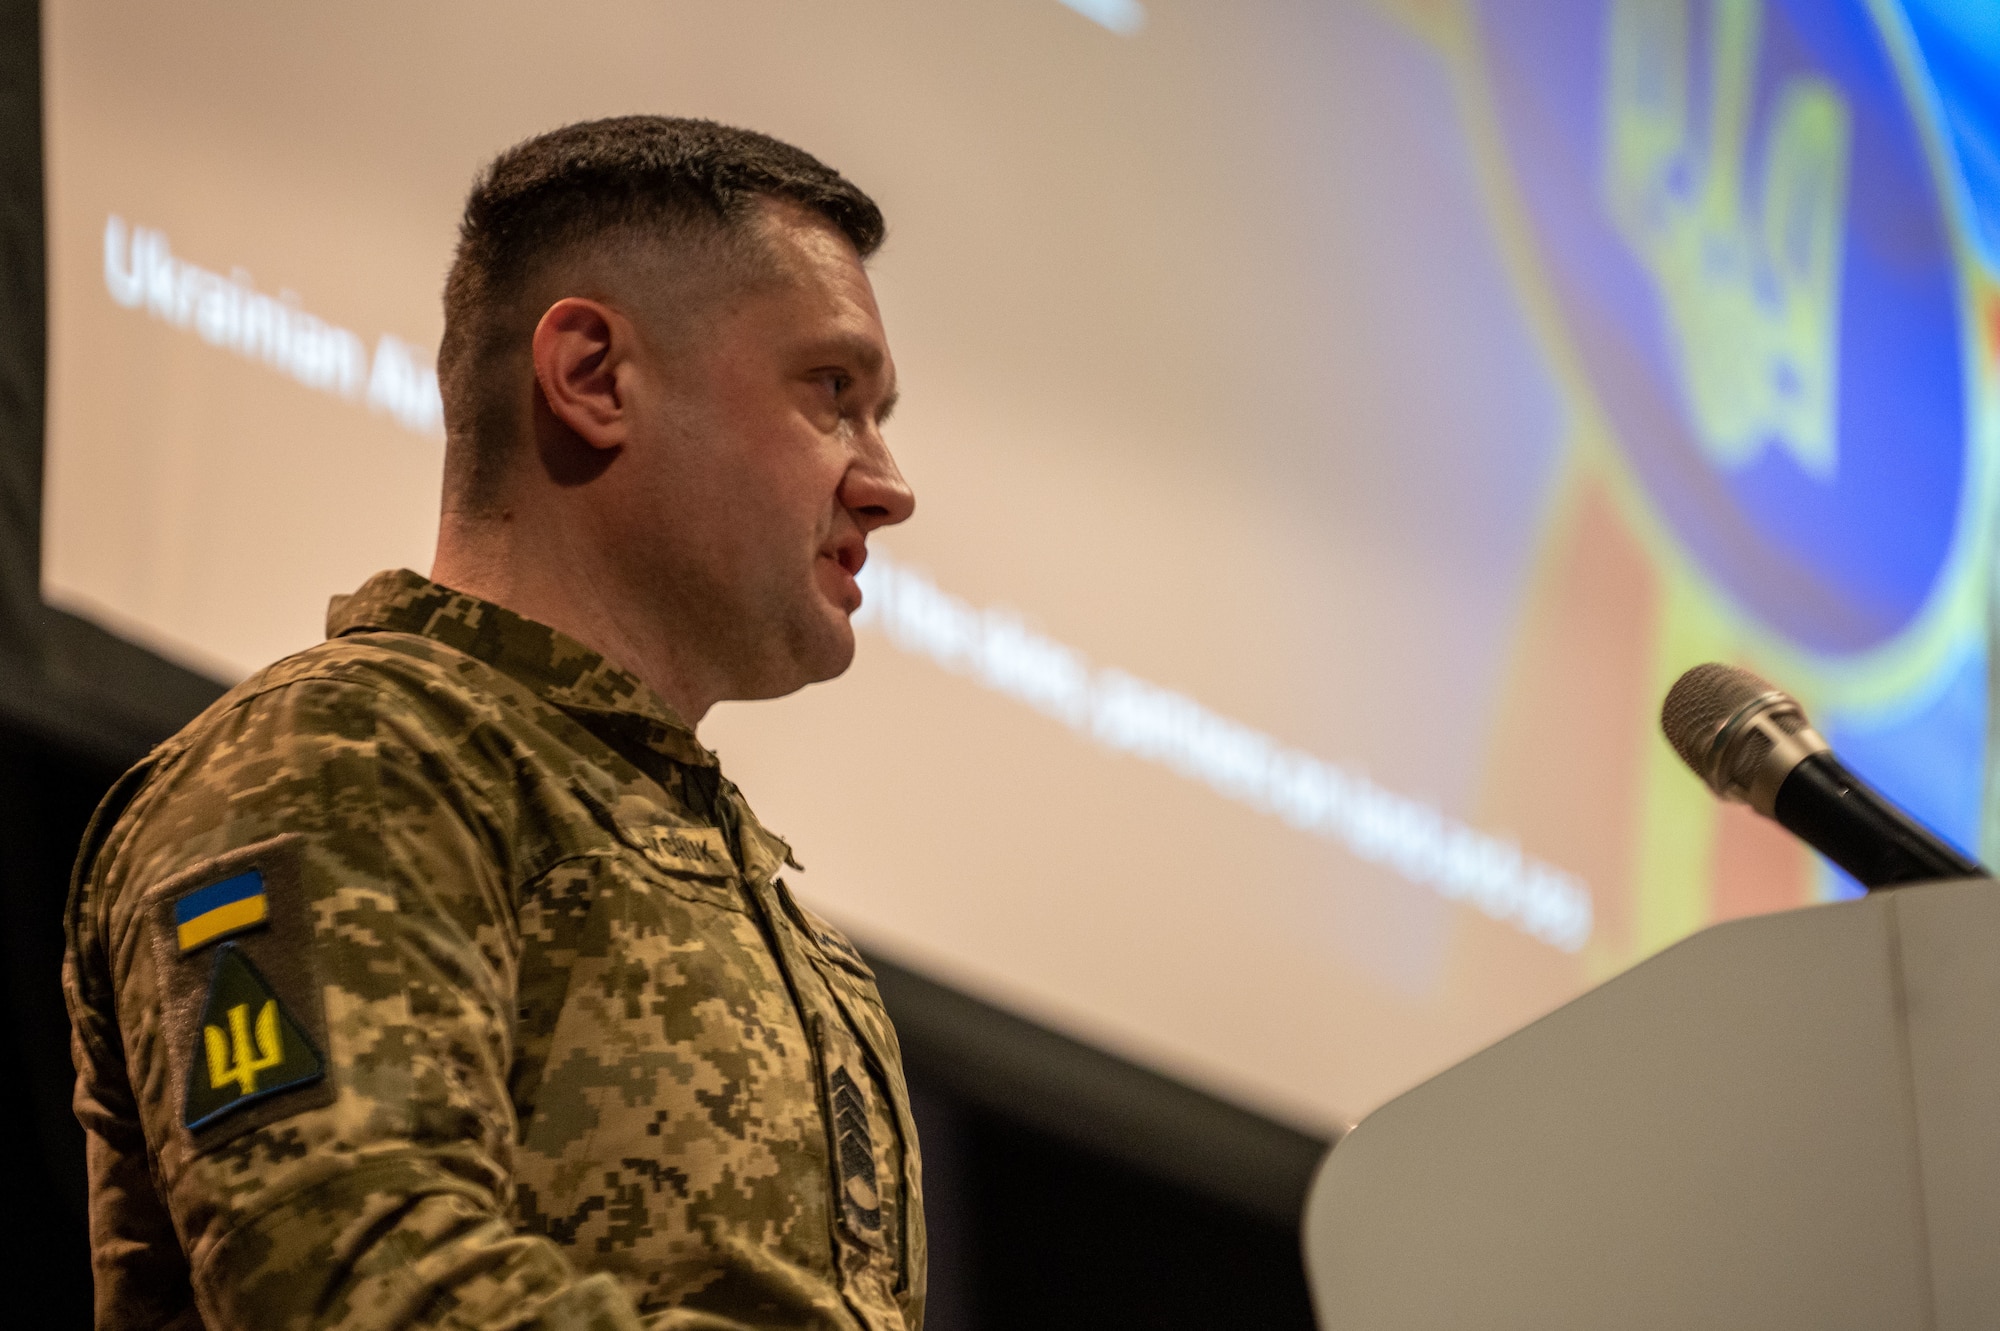 Chief Master Sgt. of the Air Force of the Armed Forces of Ukraine Kostiantyn Stanislavchuk briefs U.S. Air Force service members at Ramstein Air Base, Germany, March 14, 2023. Chief Stanislavchuk delivered two "NCO perspective from the frontlines" presentations to Ramstein servicemembers. (U.S. Air Force photo by Tech. Sgt. Steven Adkins)